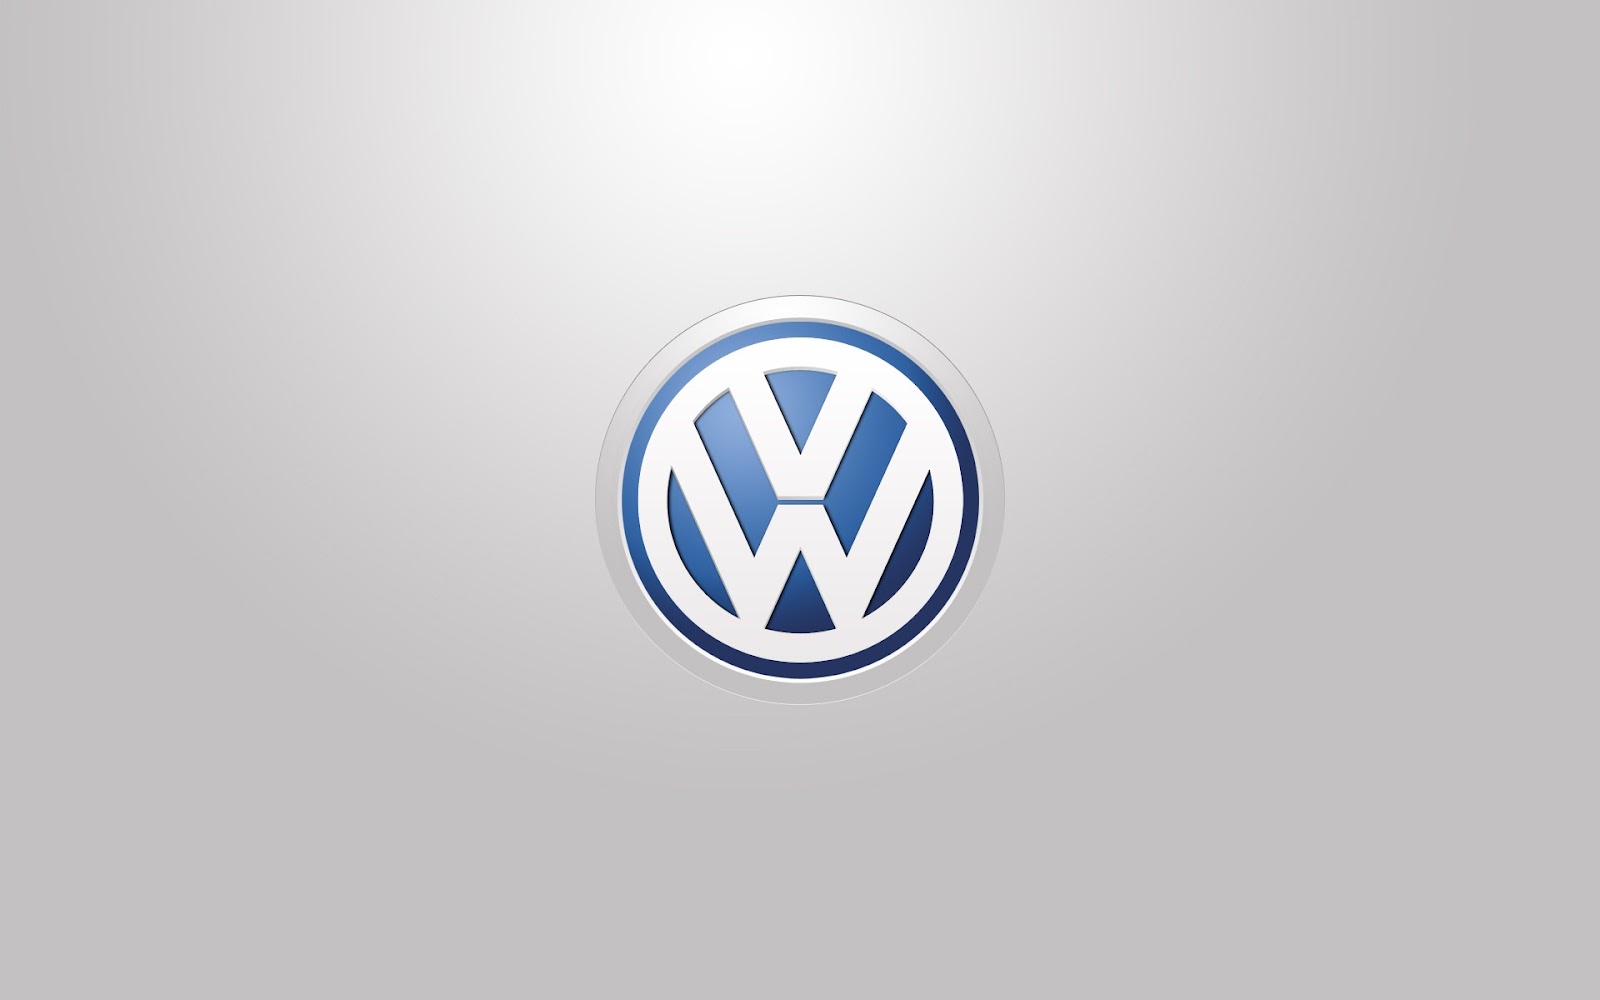 Volkswagen Car Net Apps 21 Download And Review Sourcedrivers Com Free Drivers Printers Download